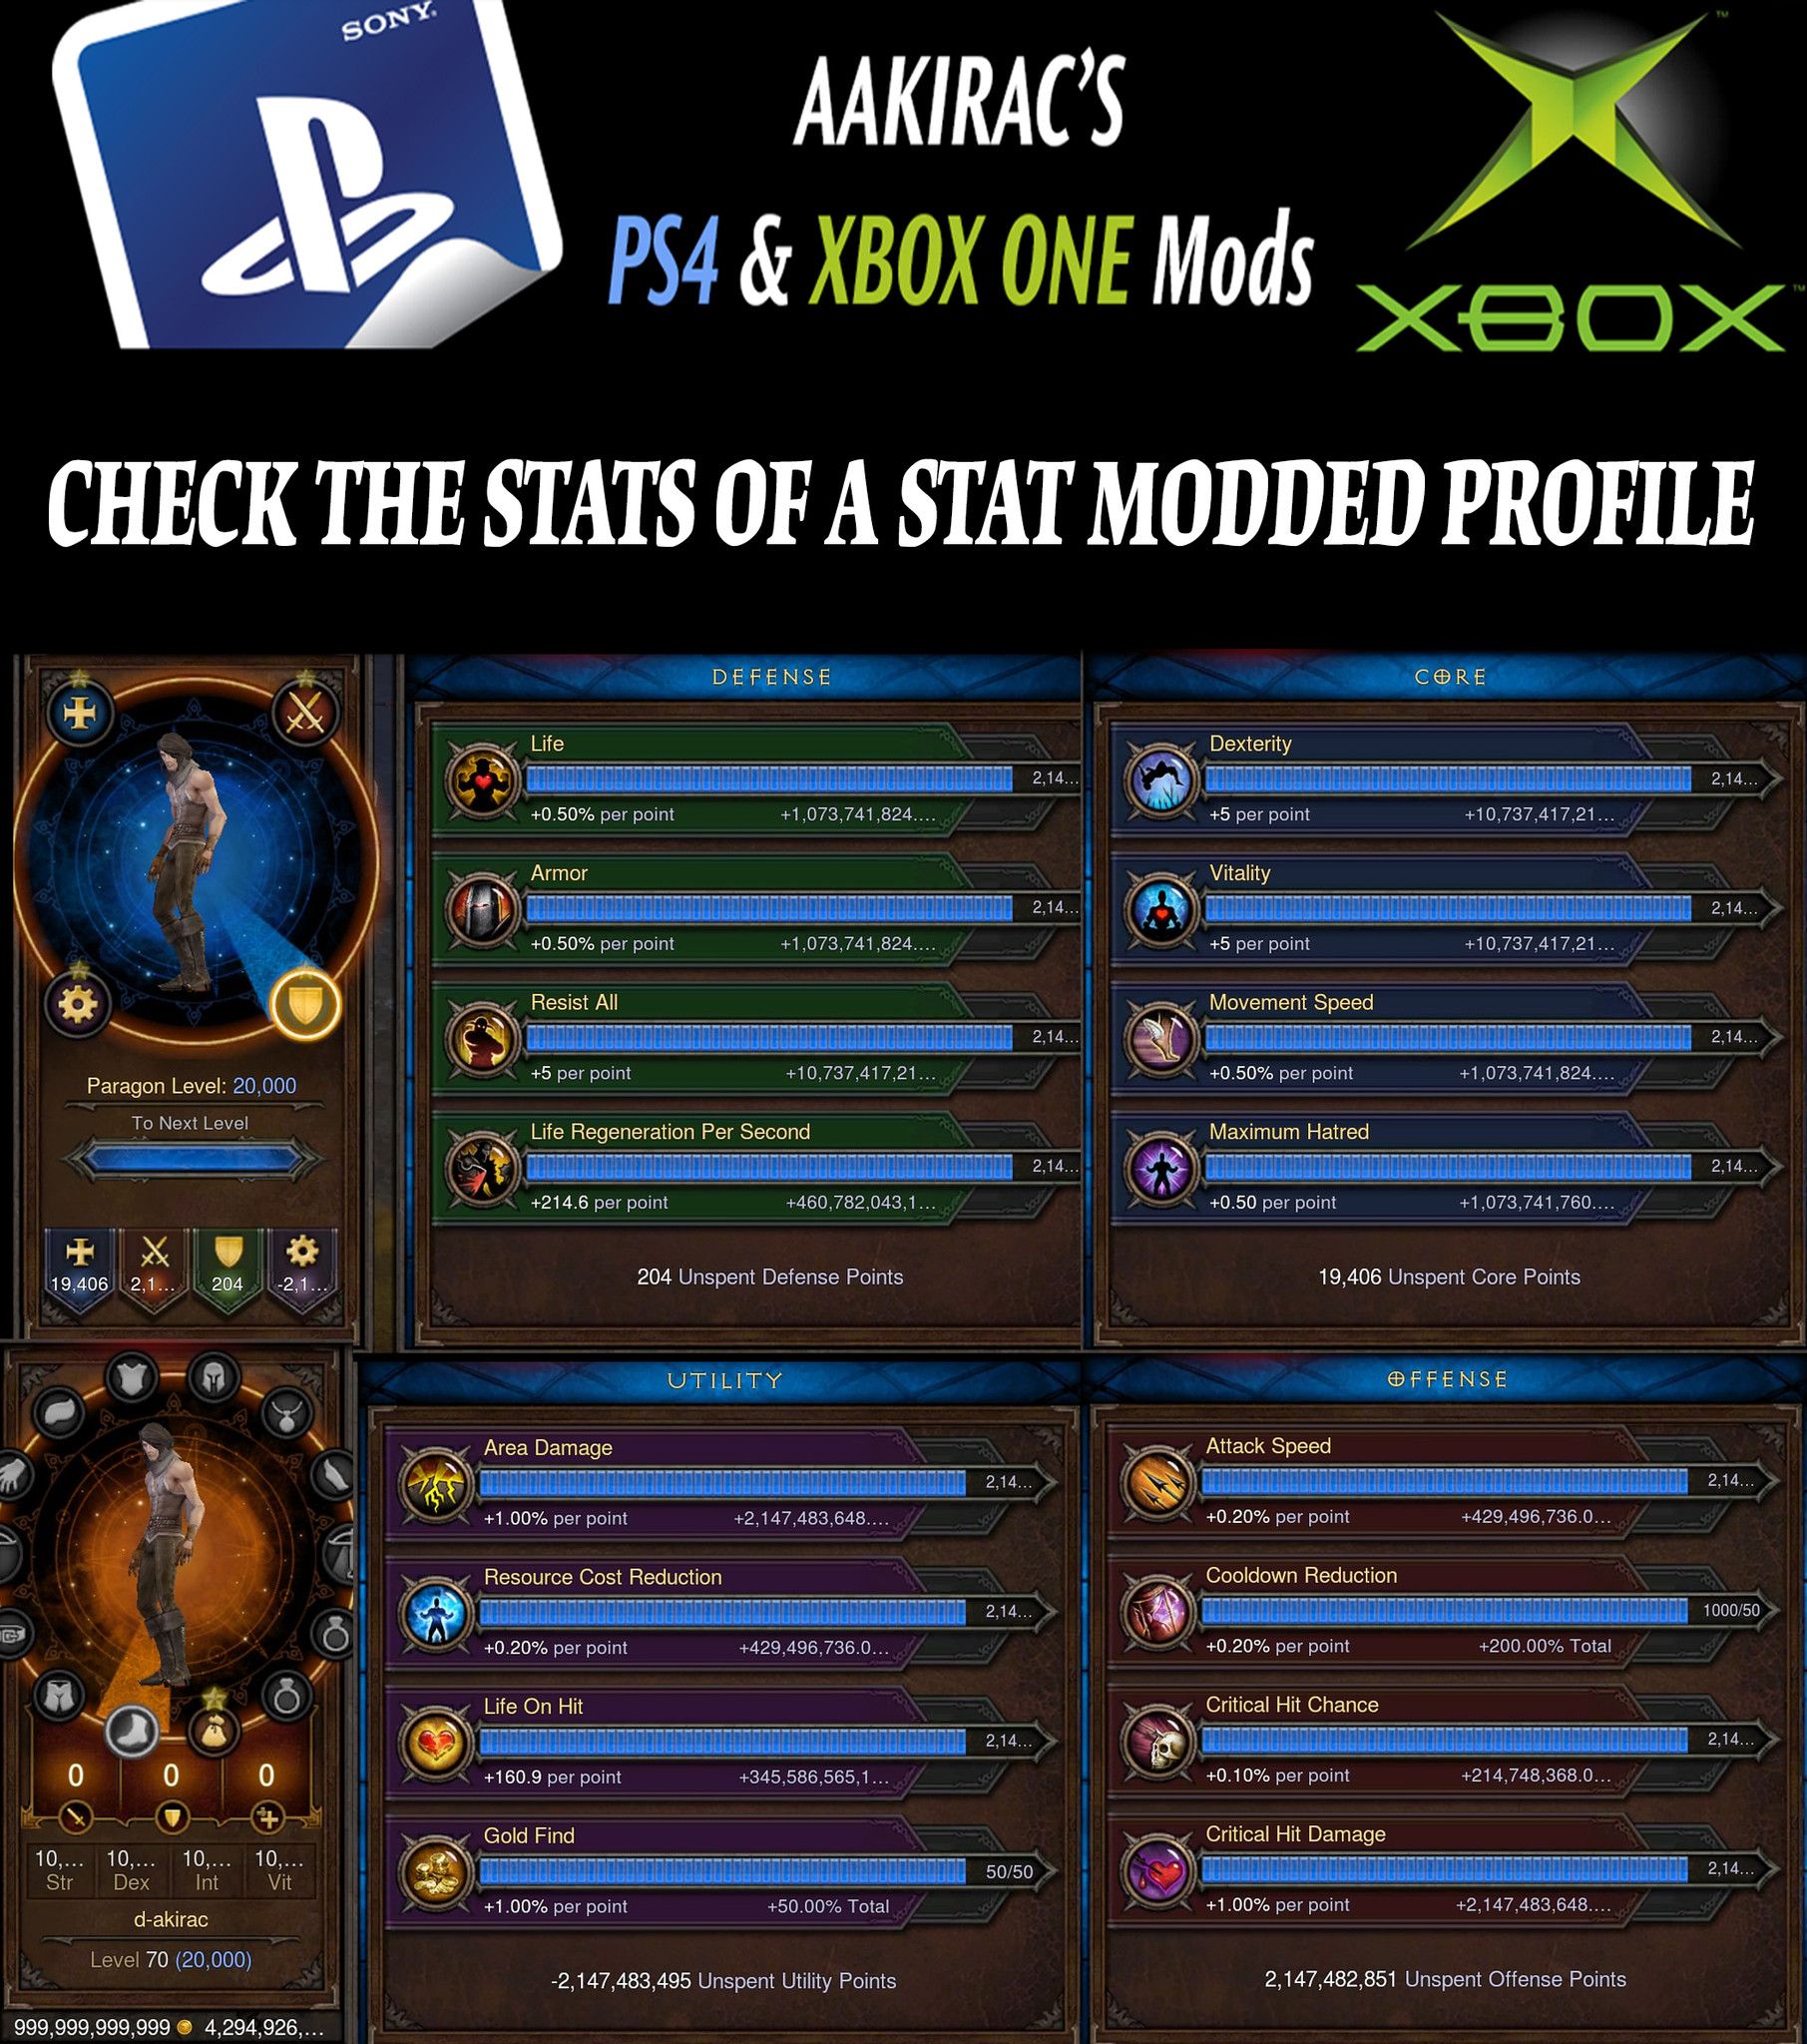 2x EXTREME Stat Modded Characters w/ Materials and Pets Bundle Diablo 3 Mods ROS Seasonal and Non Seasonal Save Mod - Modded Items and Gear - Hacks - Cheats - Trainers for Playstation 4 - Playstation 5 - Nintendo Switch - Xbox One